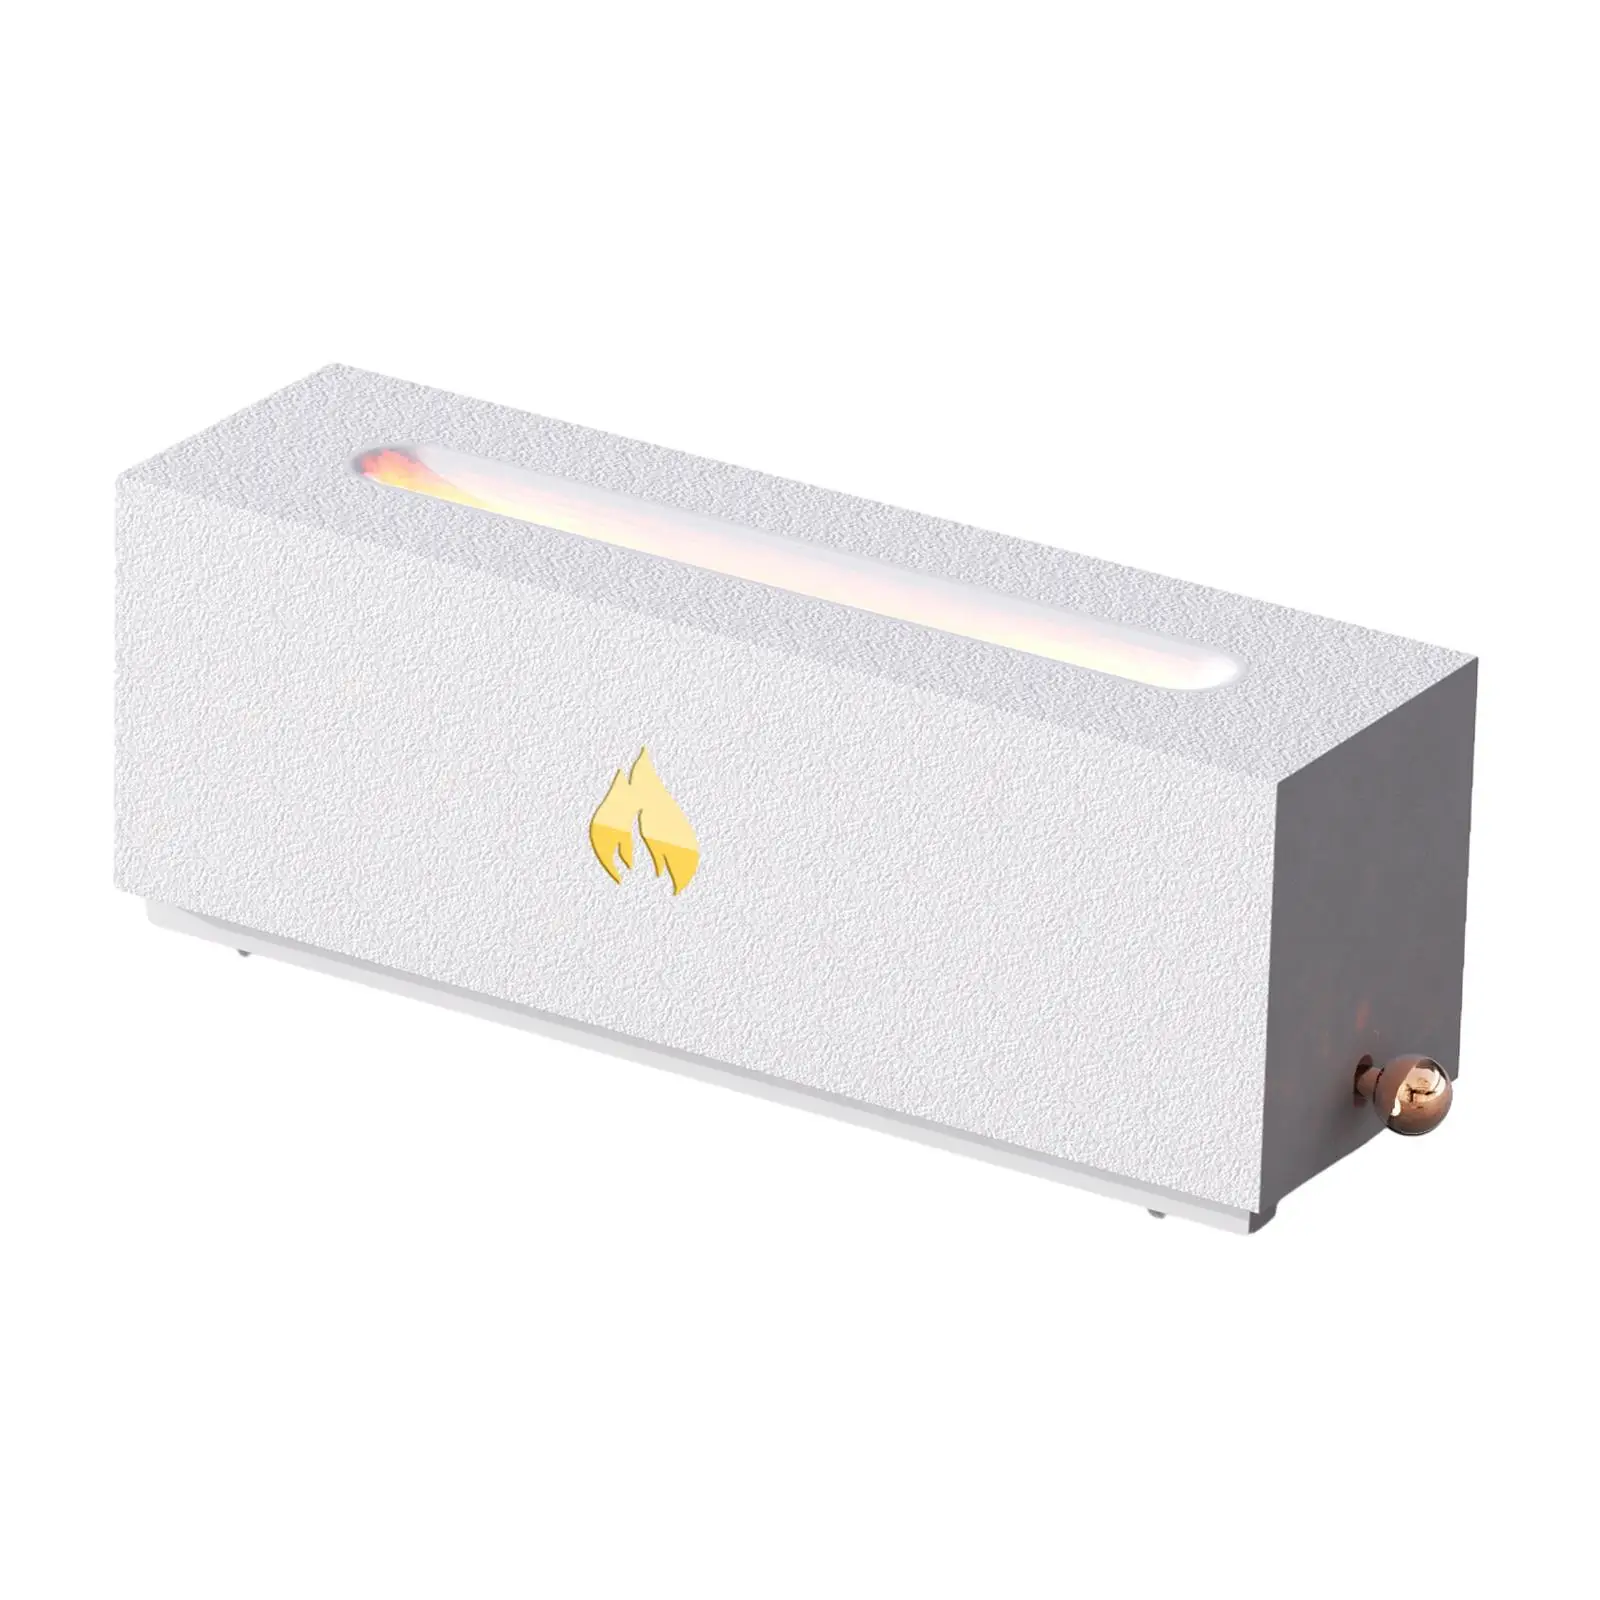 Home Fragrance Diffuser Fashion Noiseless Humidifier for Bedroom Yoga Home